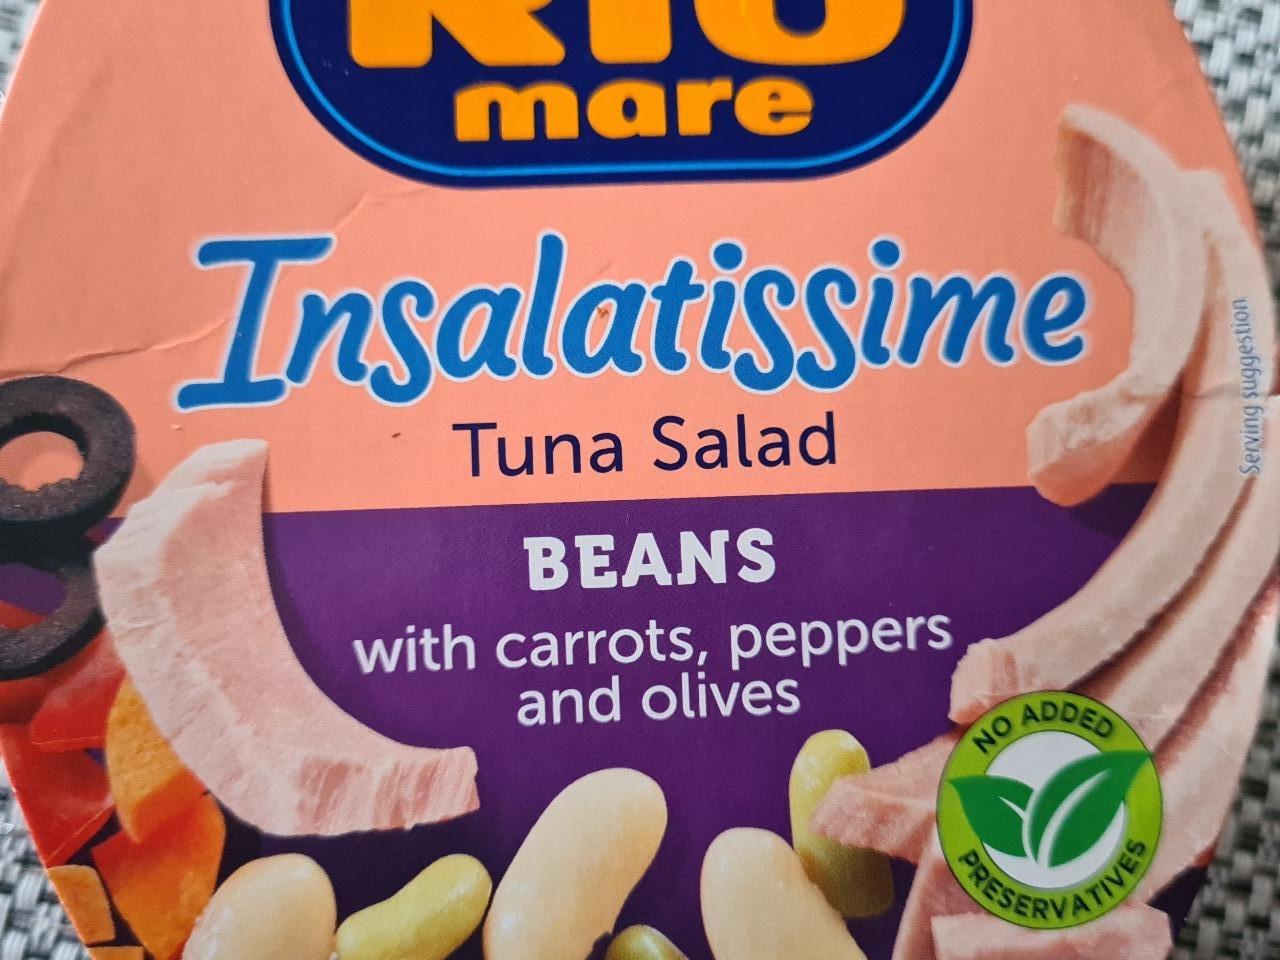 Képek - Insalatissime Tuna salad Beans with carrots peppers and olives Rio Mare